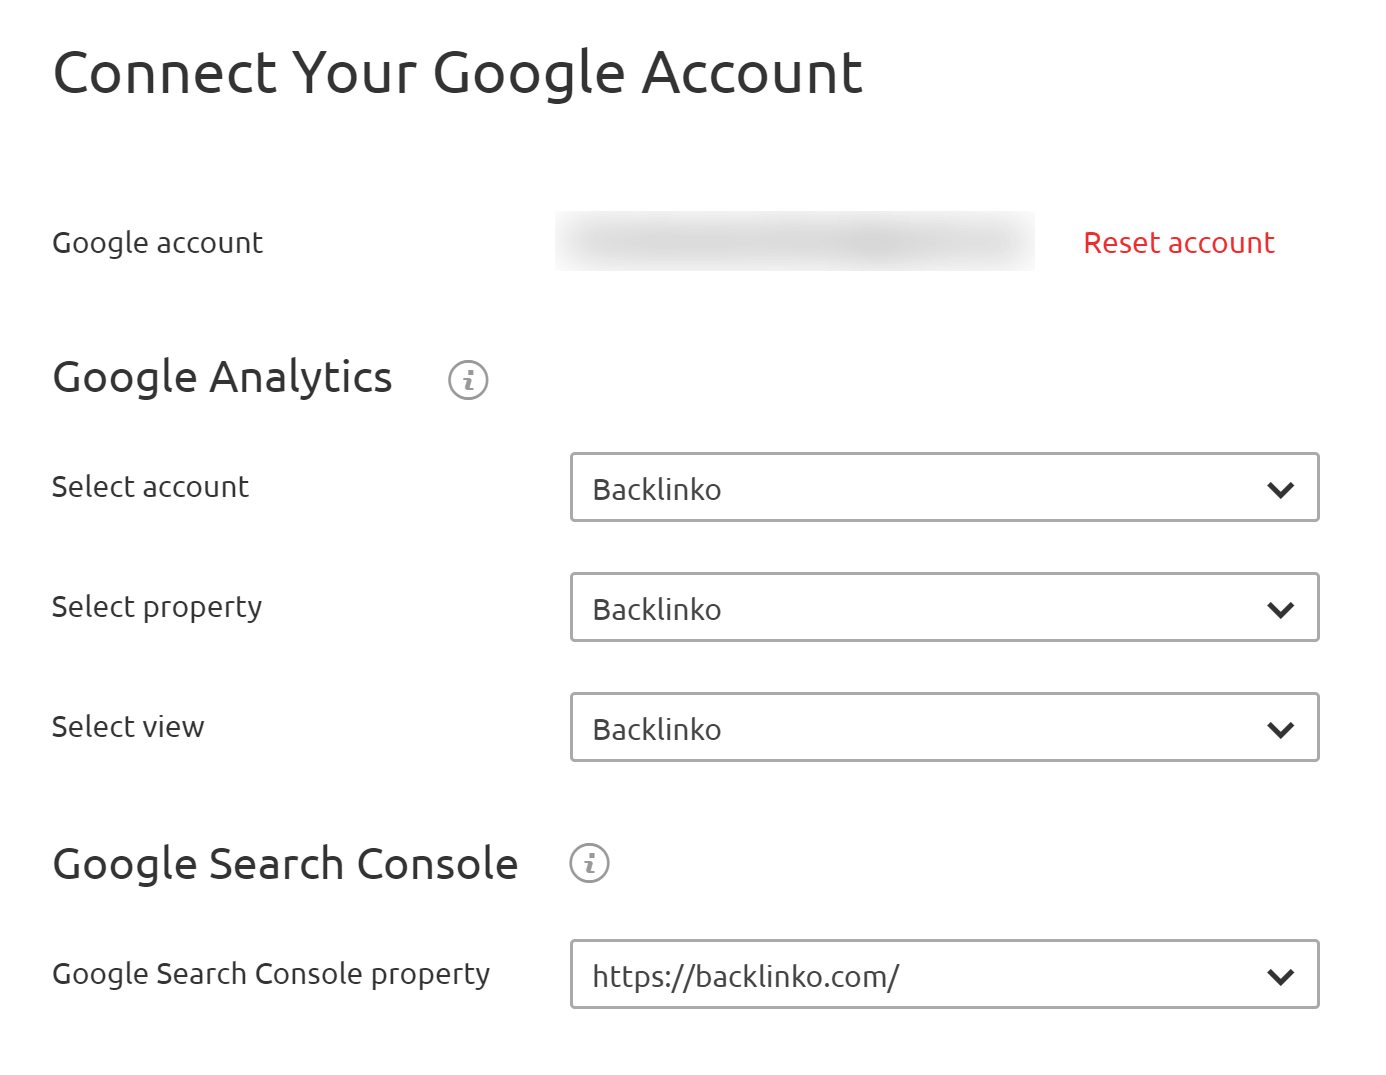 Organic Traffic insights – Connect Google Analytics and Google Search Console accounts